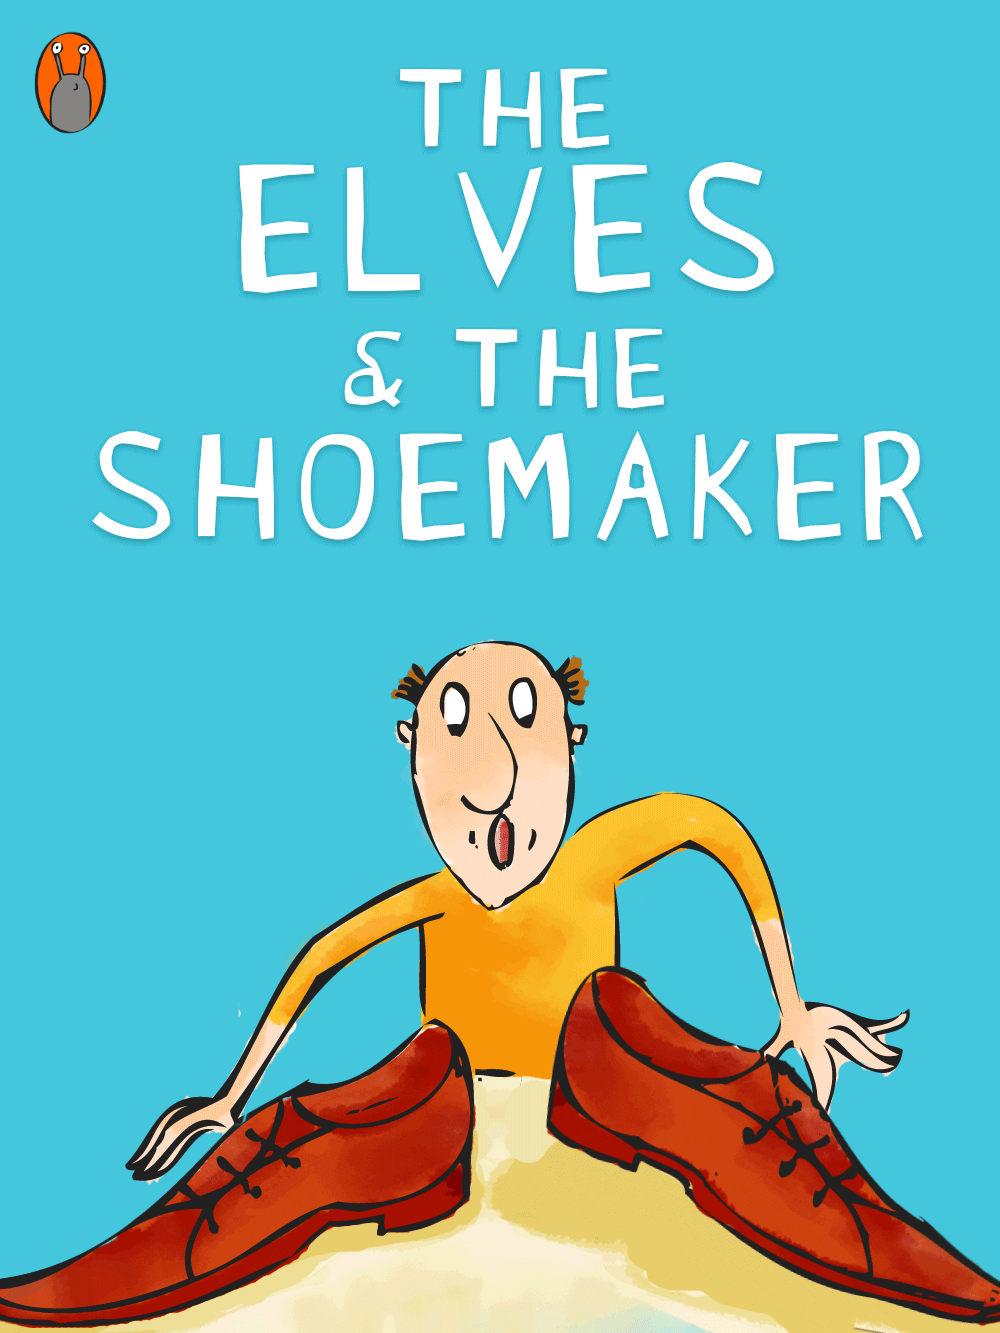 the elves and the shoemaker clipart house